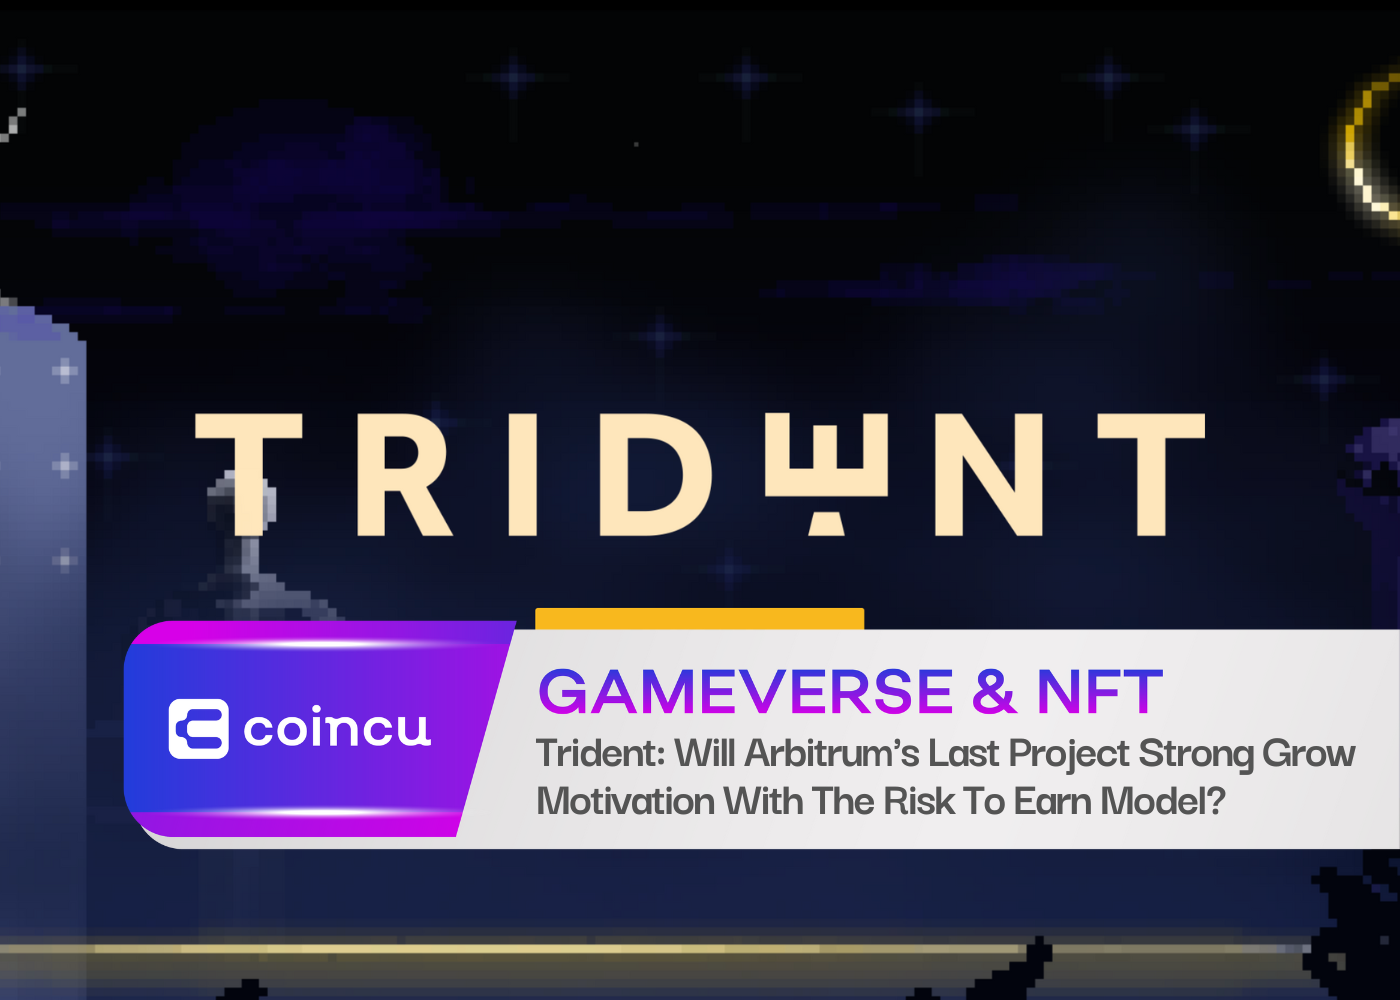 Trident: Will Arbitrum's Last Project Strong Grow Motivation With The Risk To Earn Model?